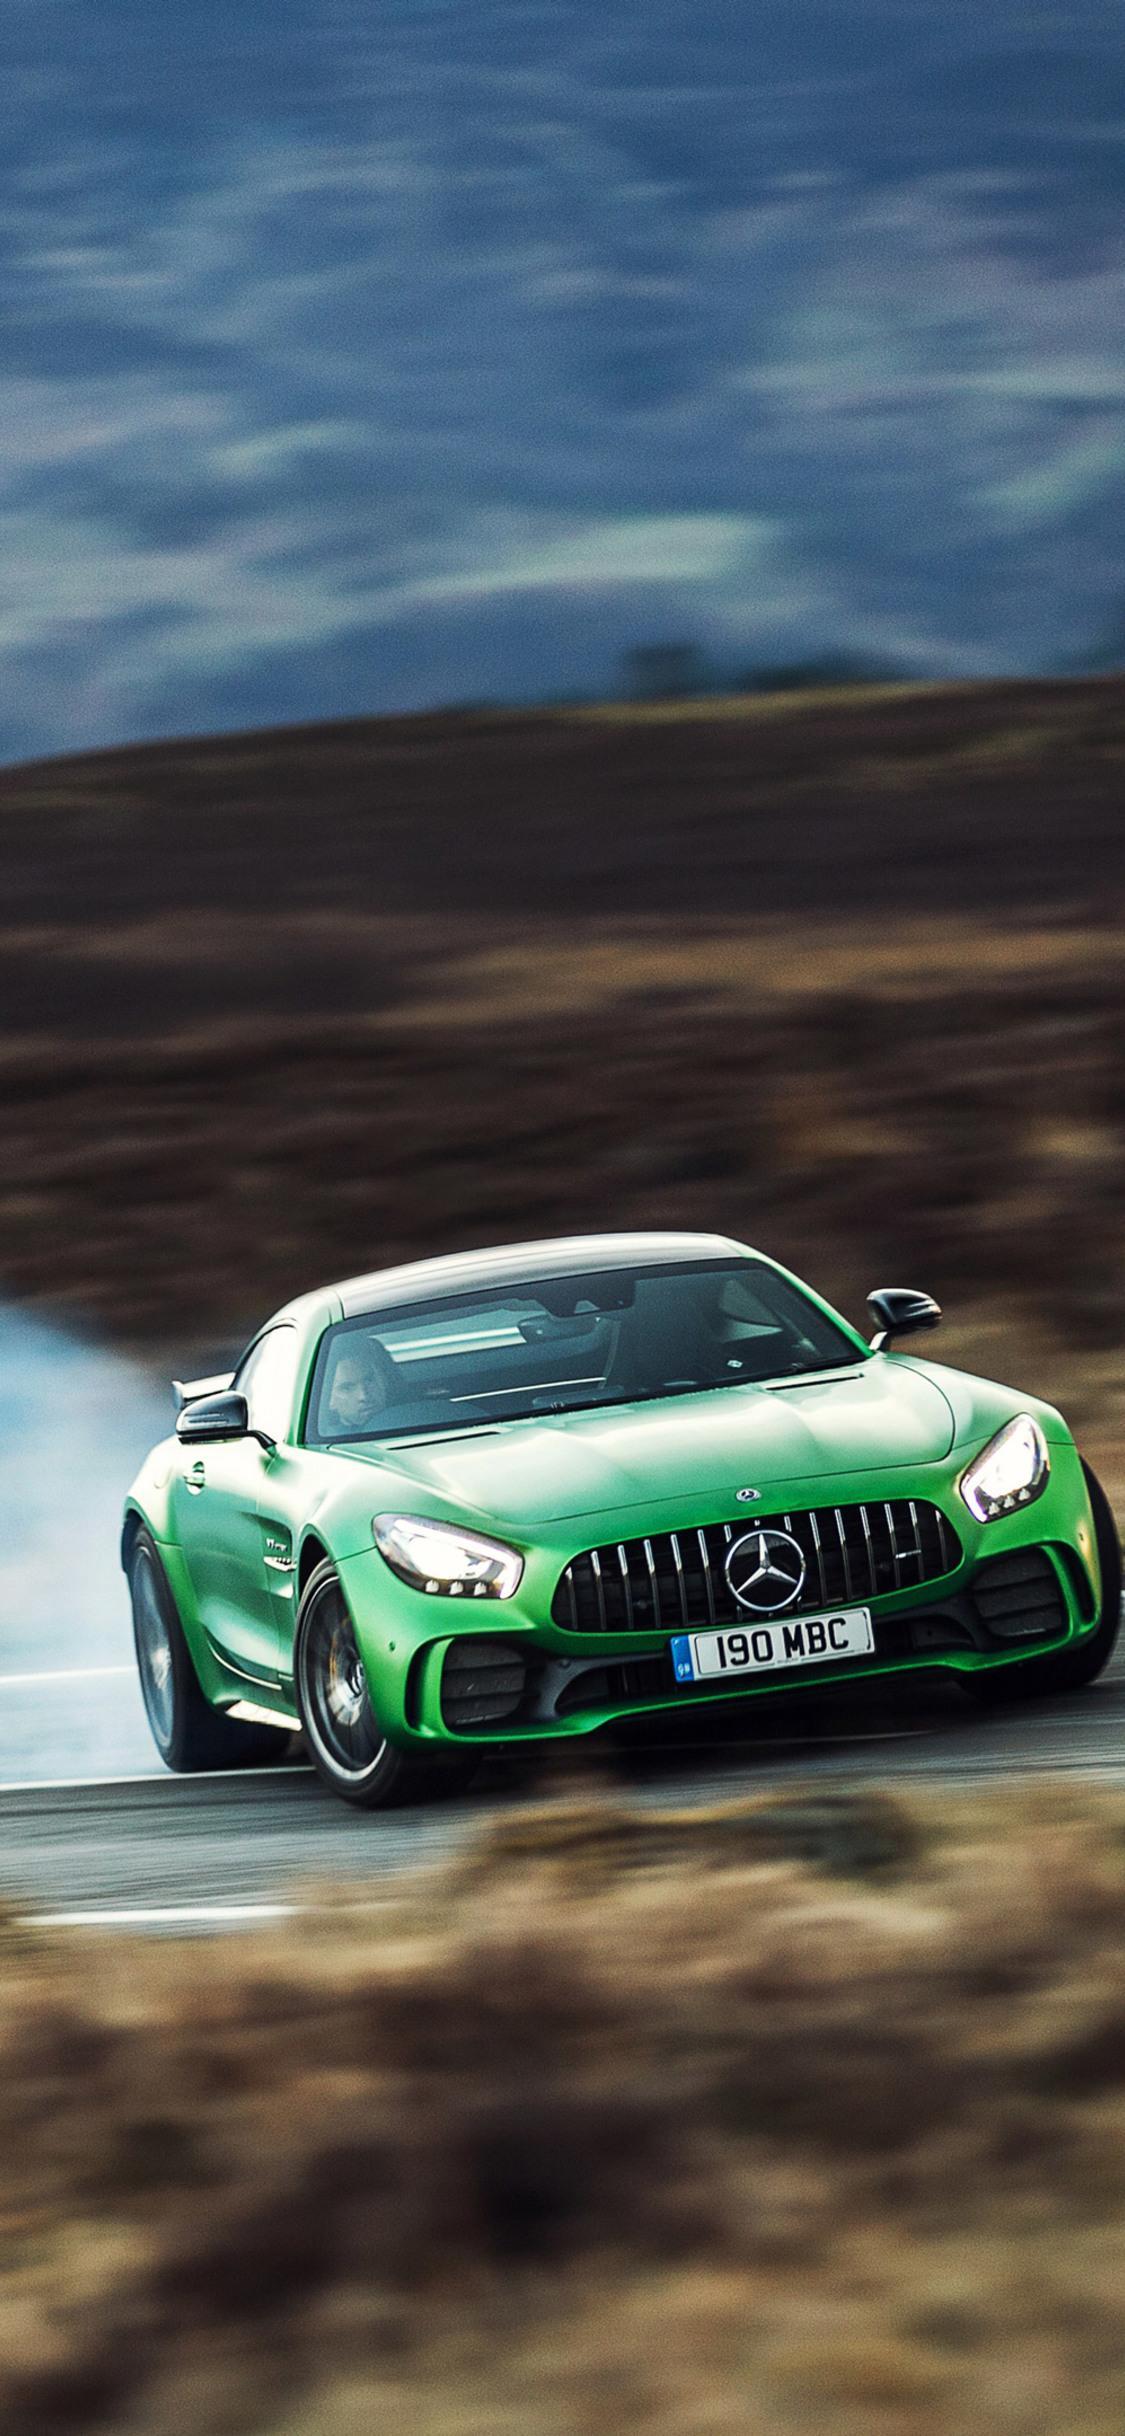 Download Amg iPhone Wallpaper, HD Background Download